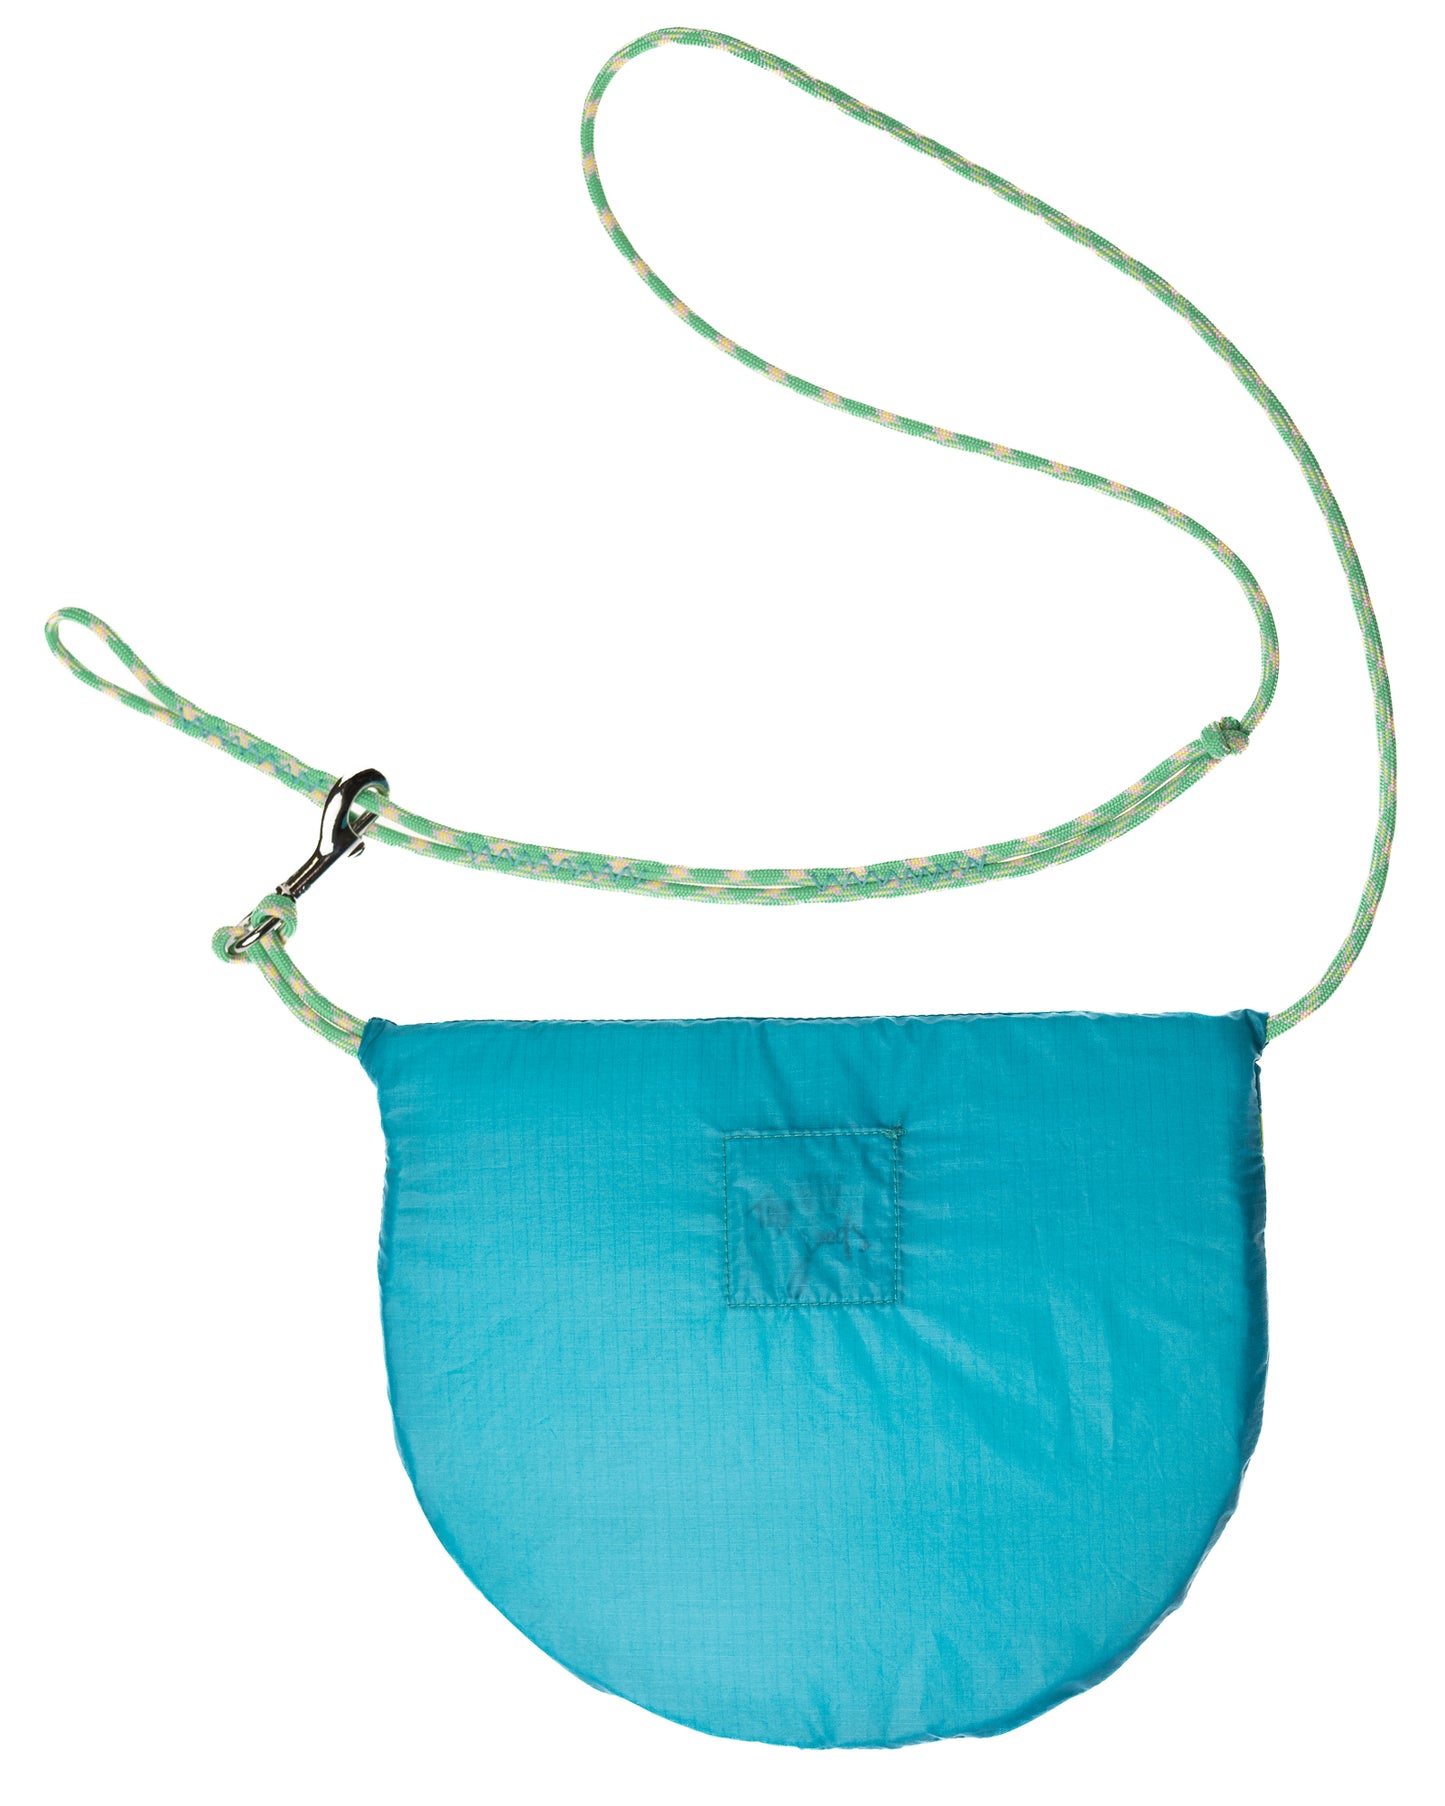 flat lay crossbody bag in turquoise and green made from recycled rip stop nylon